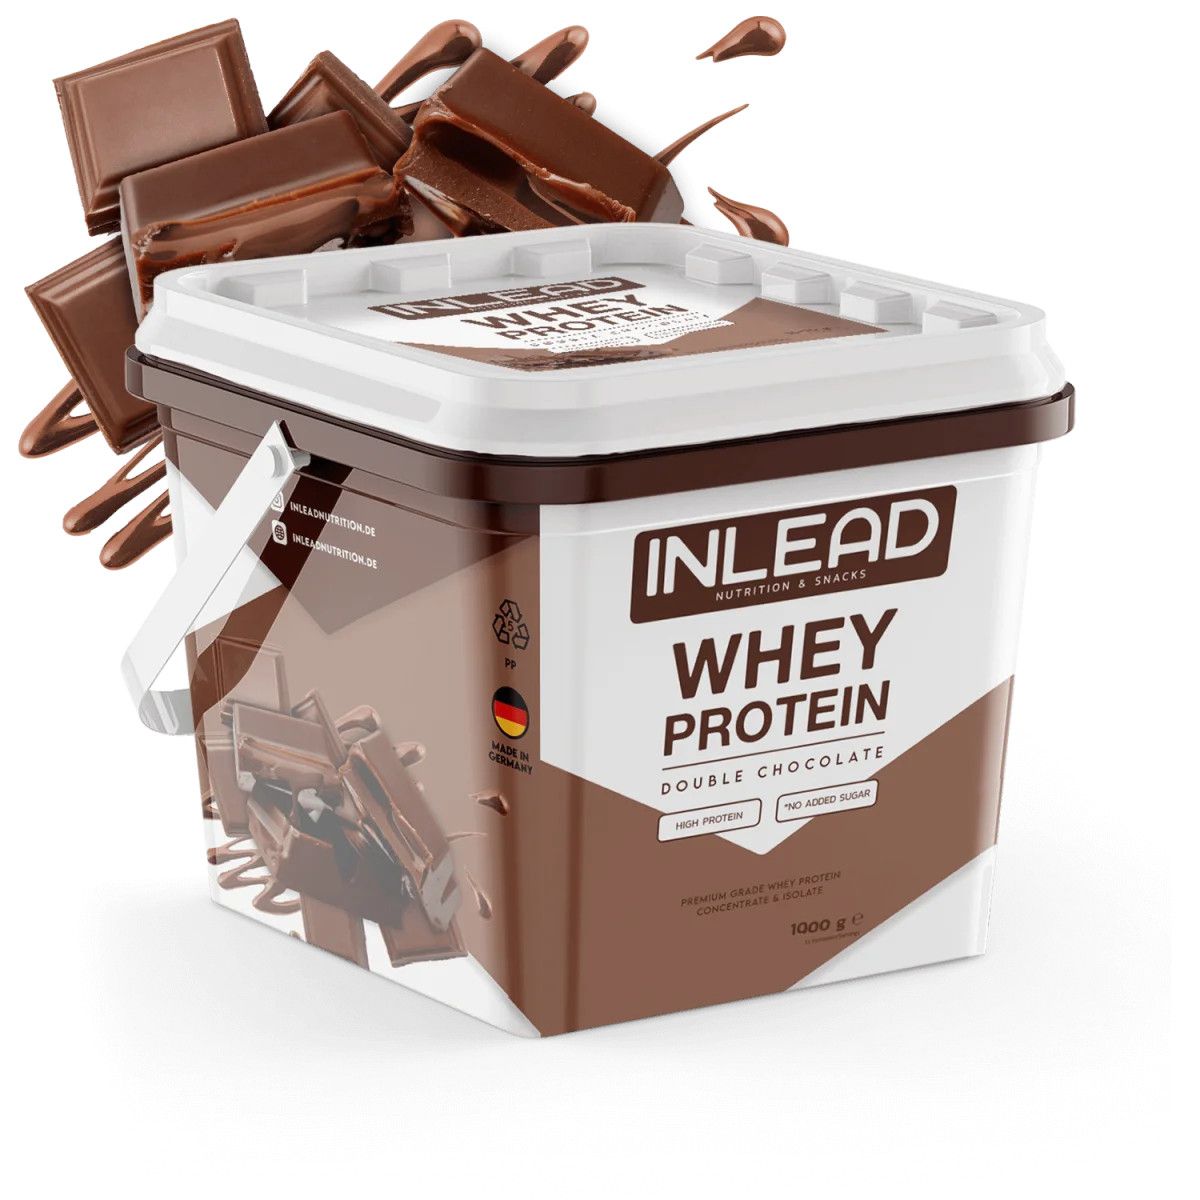 Inlead Whey Protein - Double Chocolate